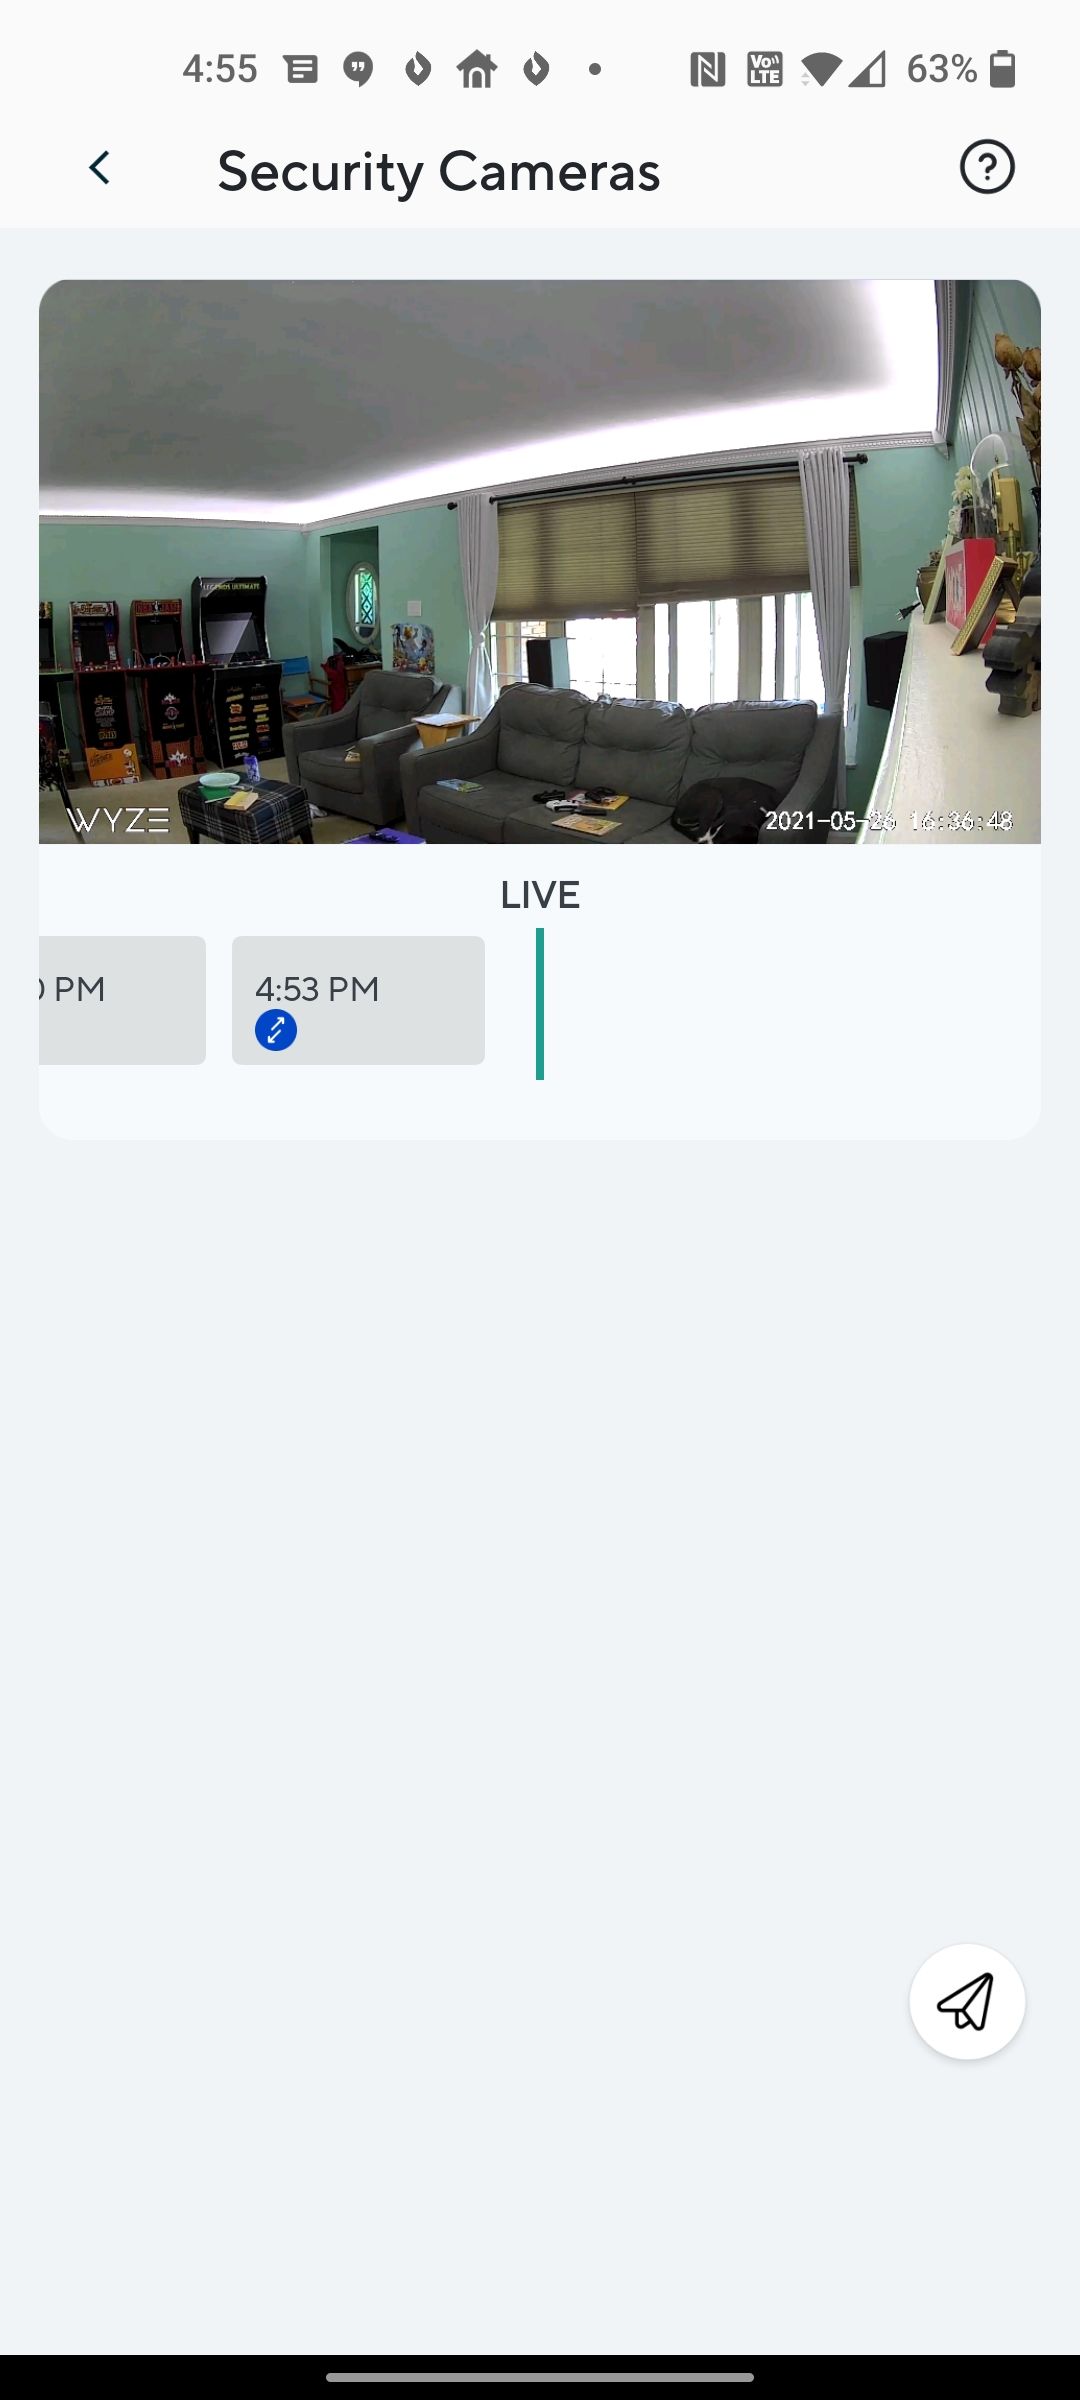 Wyze's Home Monitoring security camera views.